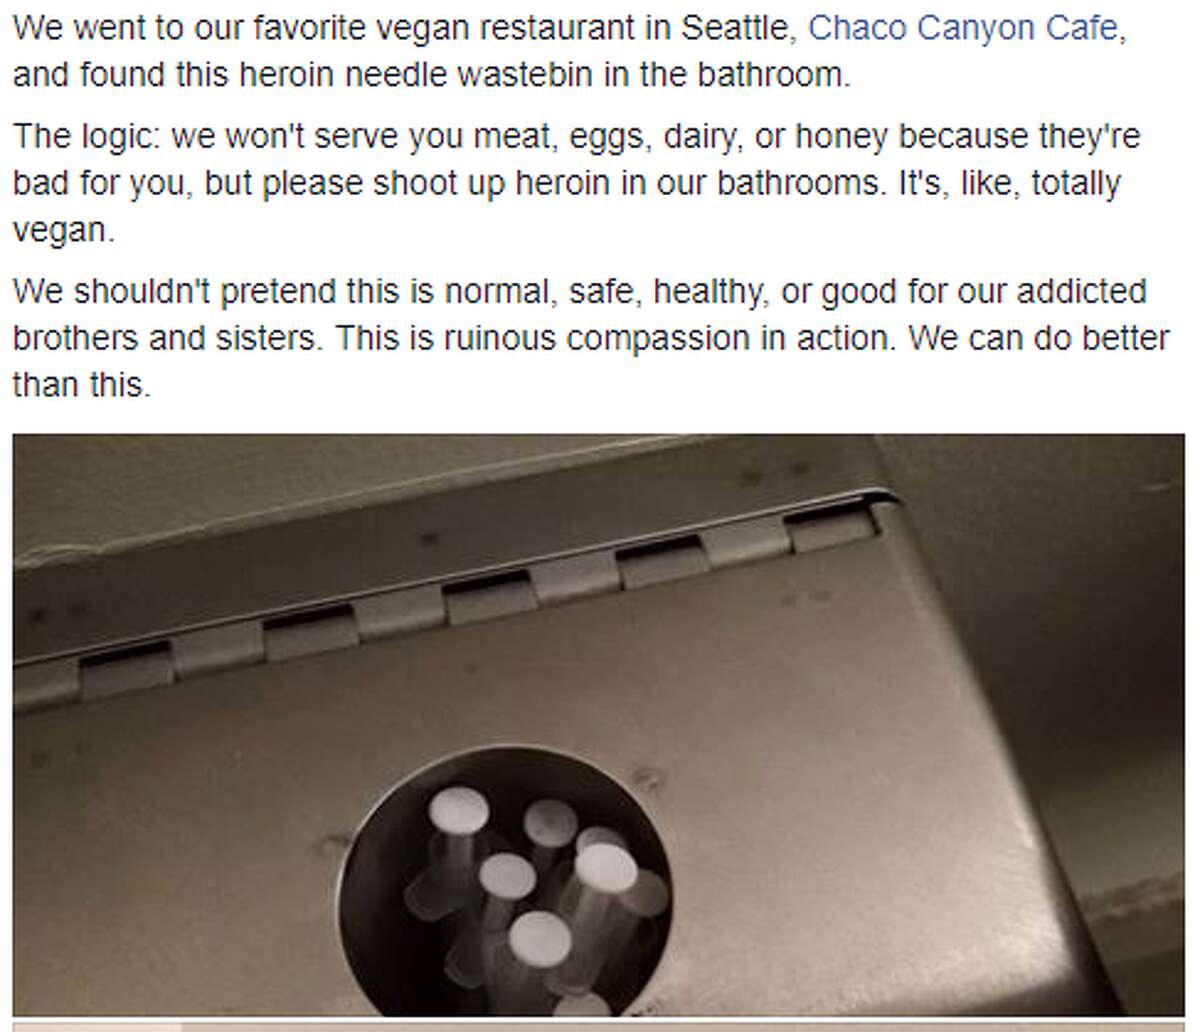 The Facebook post that started the internet firestorm around Chaco Canyon Organic Cafe.